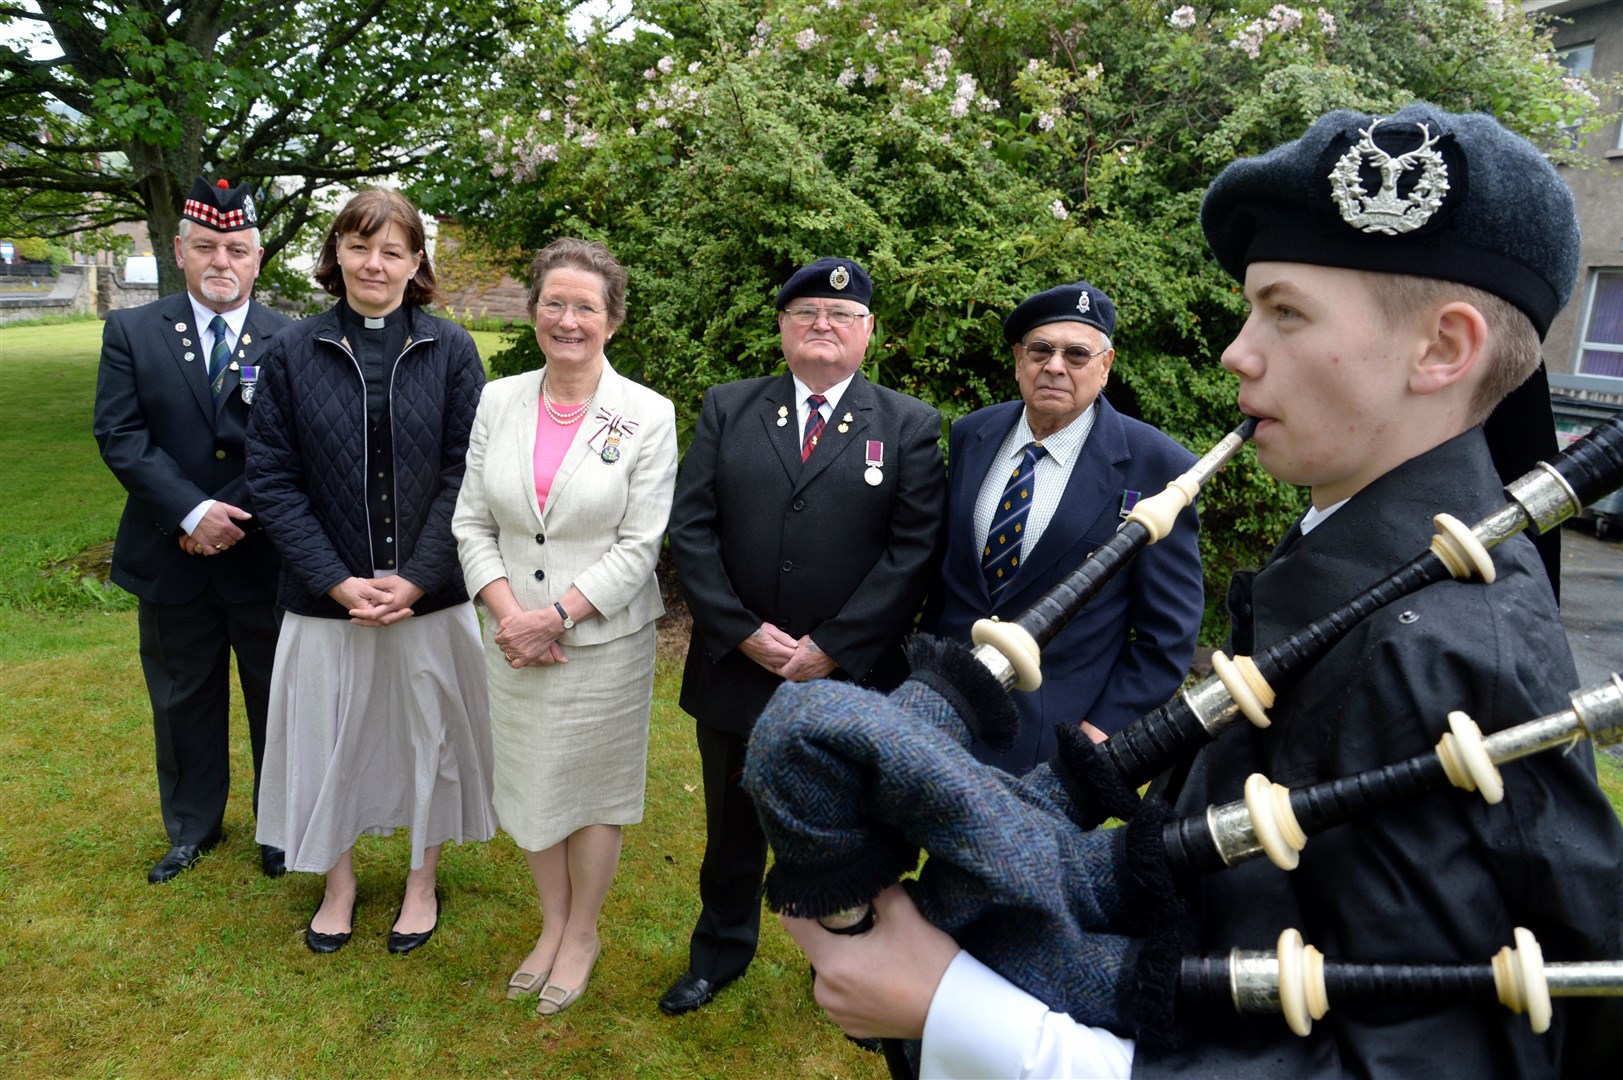 Pictured are (left to right) Morris Colven, secretary RBLS Dingwall, Rev Julia Boothby, Lord Lt Janet Bowen, Fraser Campbell, chairman RBLS Dingwall , Ron Gomez , chairman RBLS Invergordon and piper Ruaraidh Drennan (13). Picture: Gair Fraser. Image No. 044230